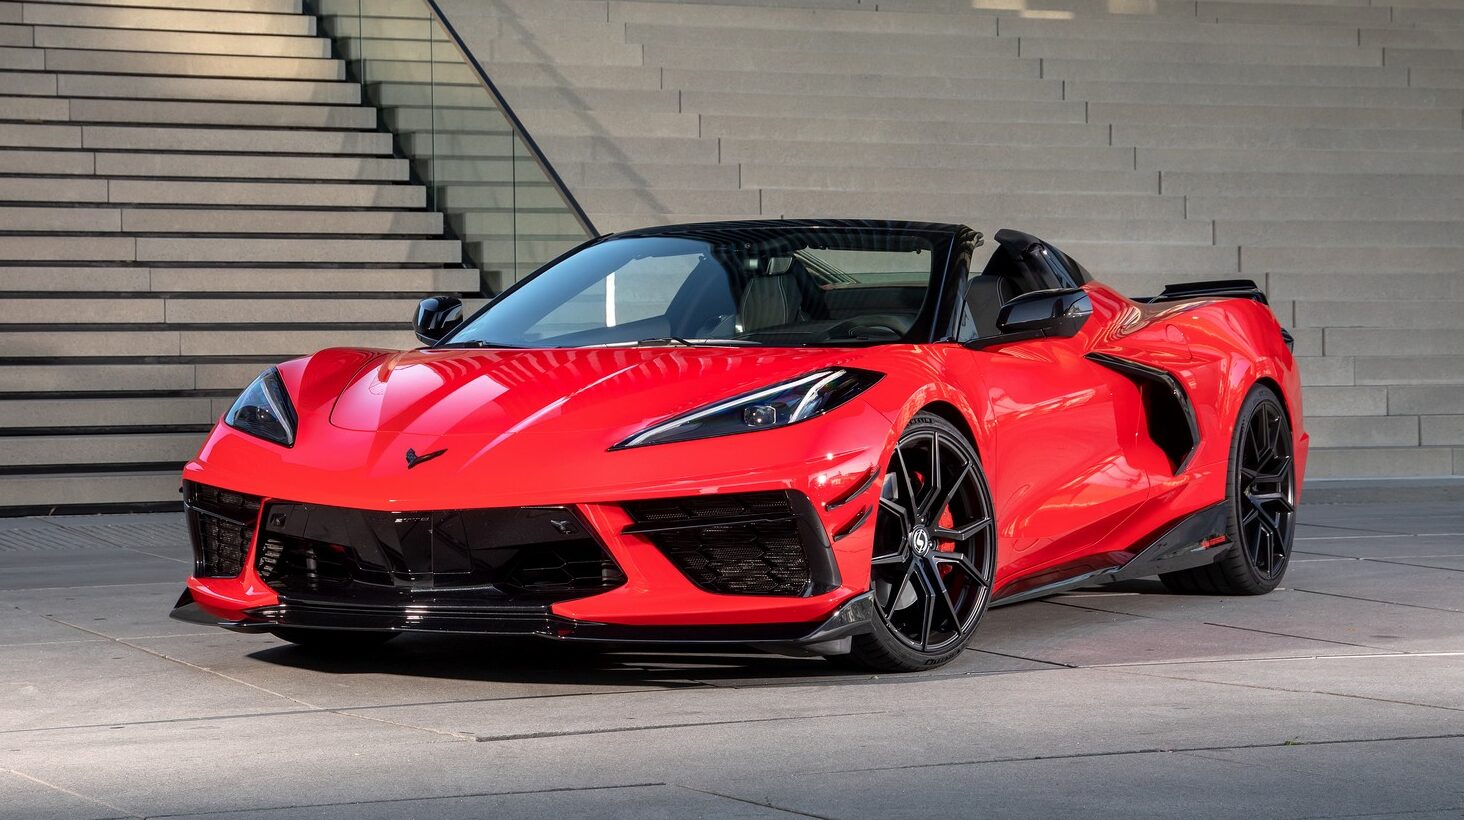 SlyStyle-C8-Corvette-Front-Side-Angle-Look